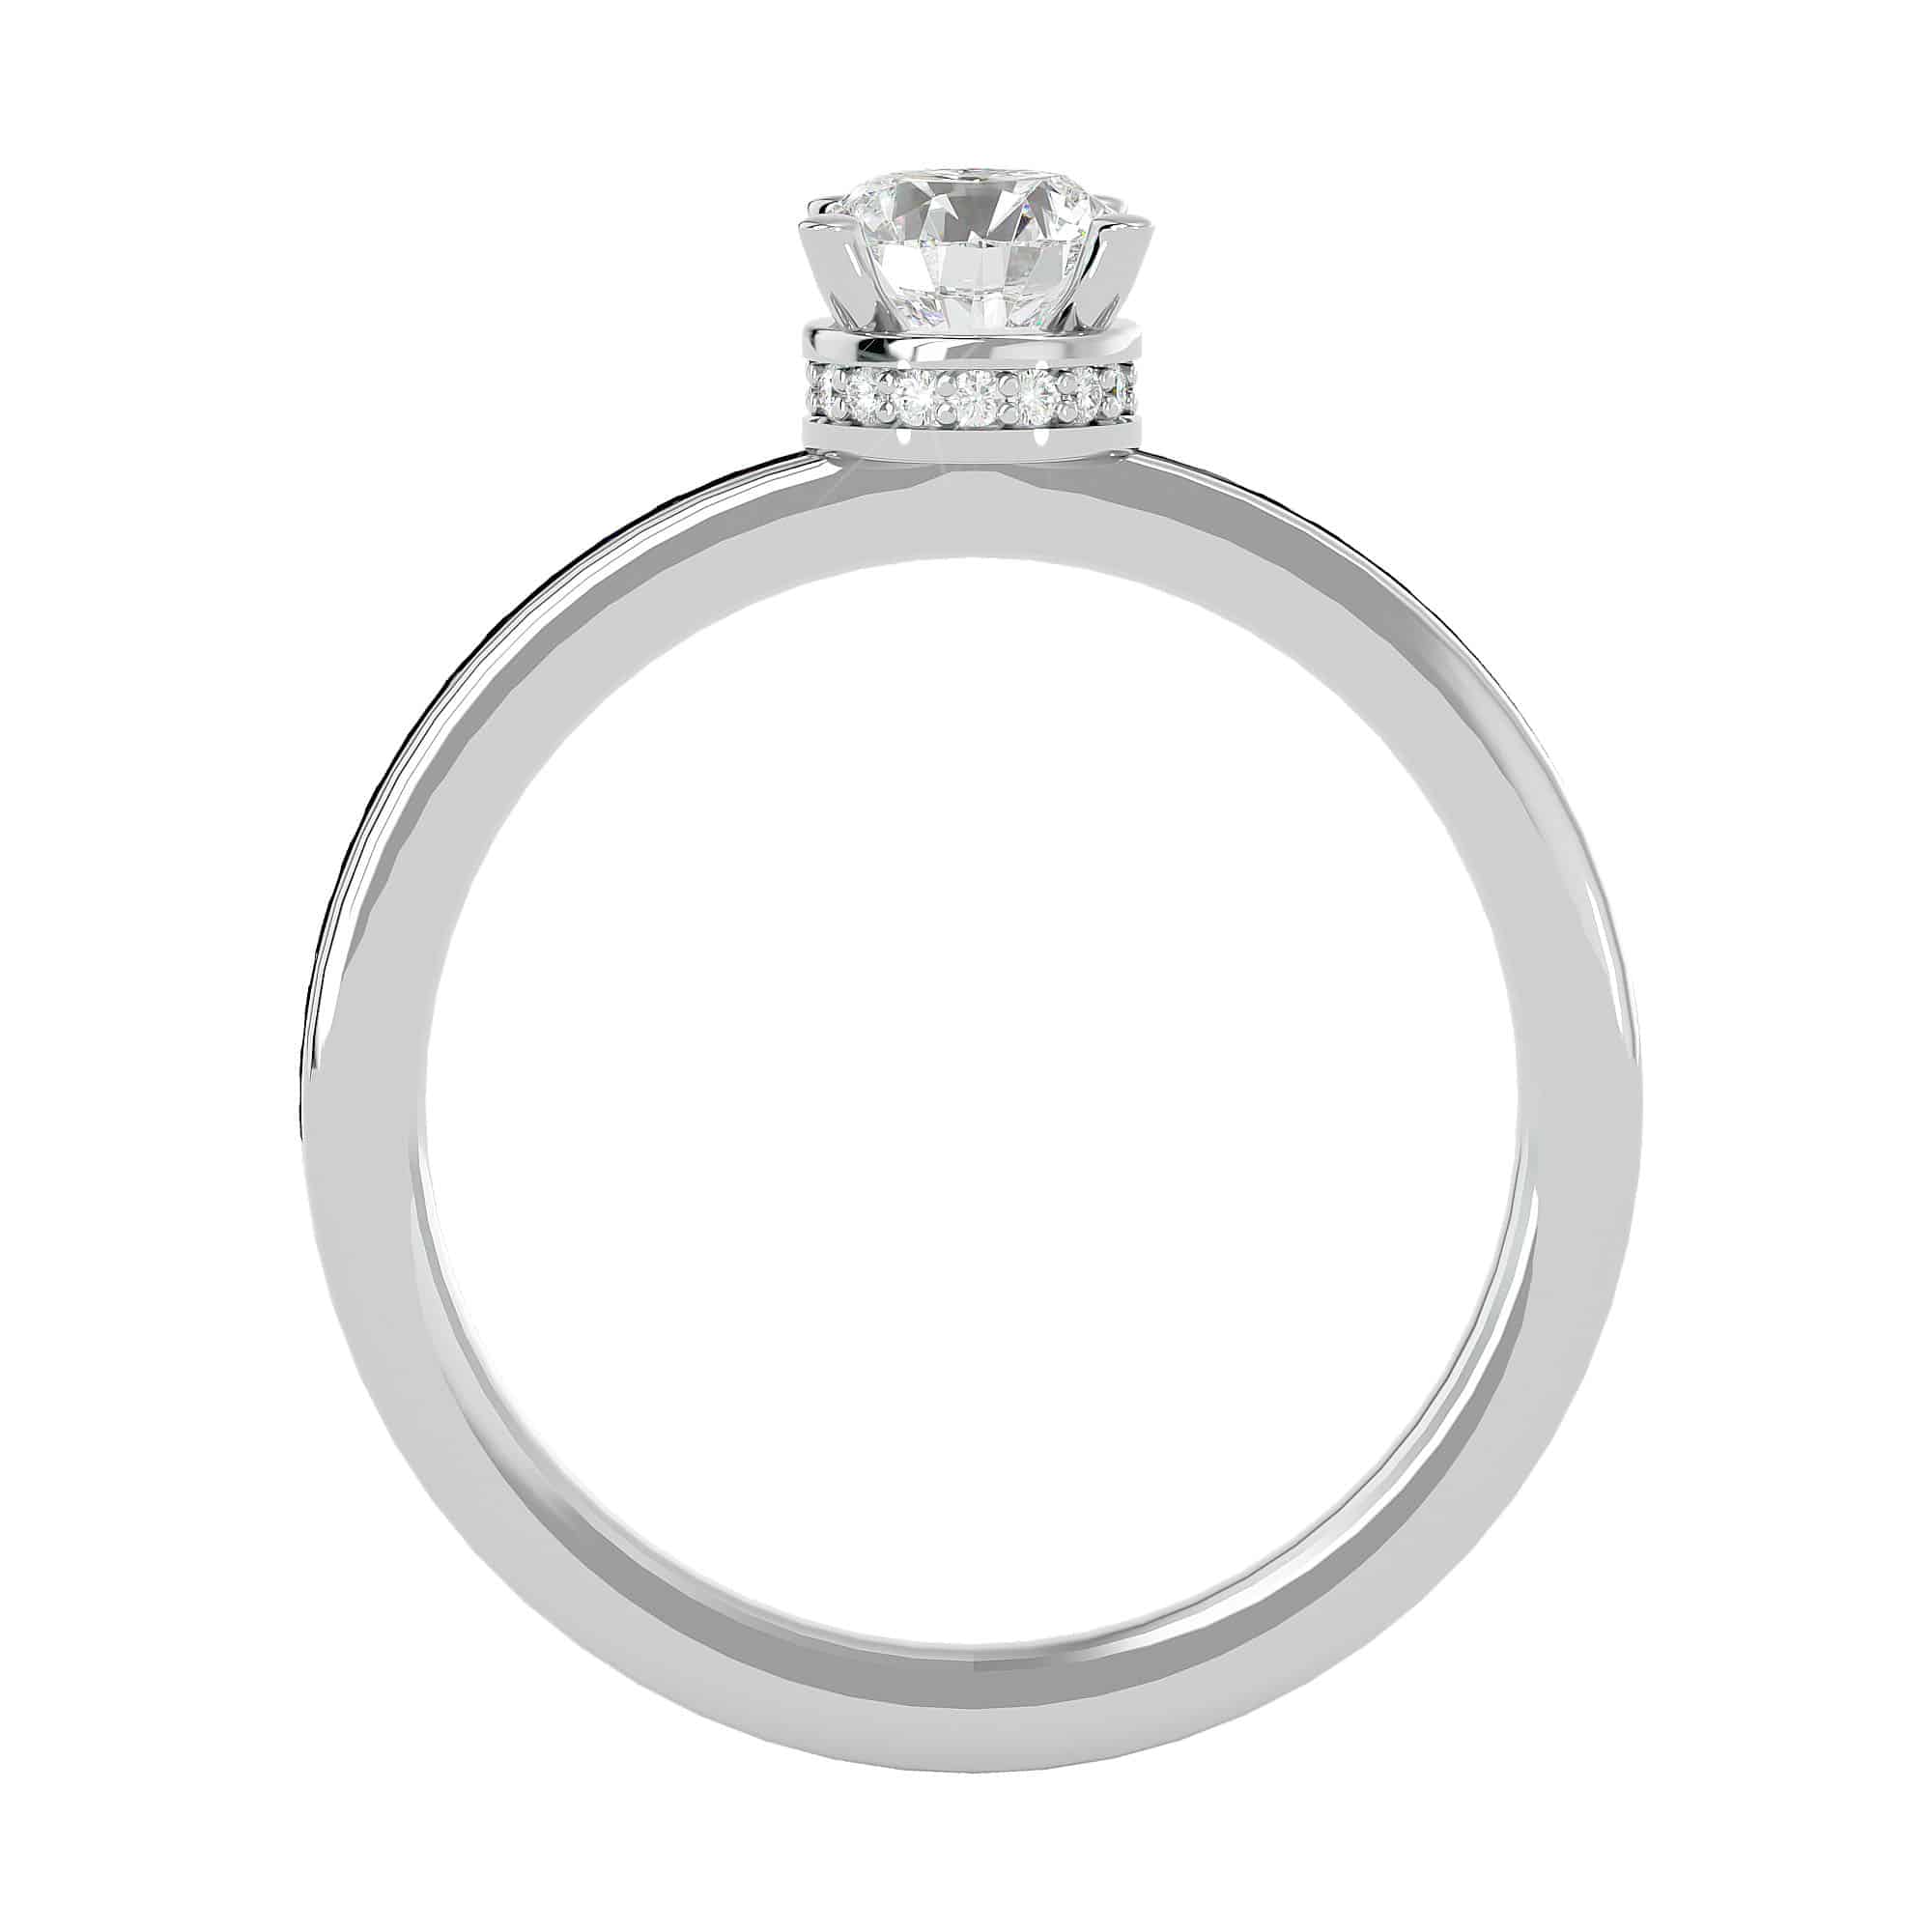 Concealed Halo Engagement Ring Solitaire Setting